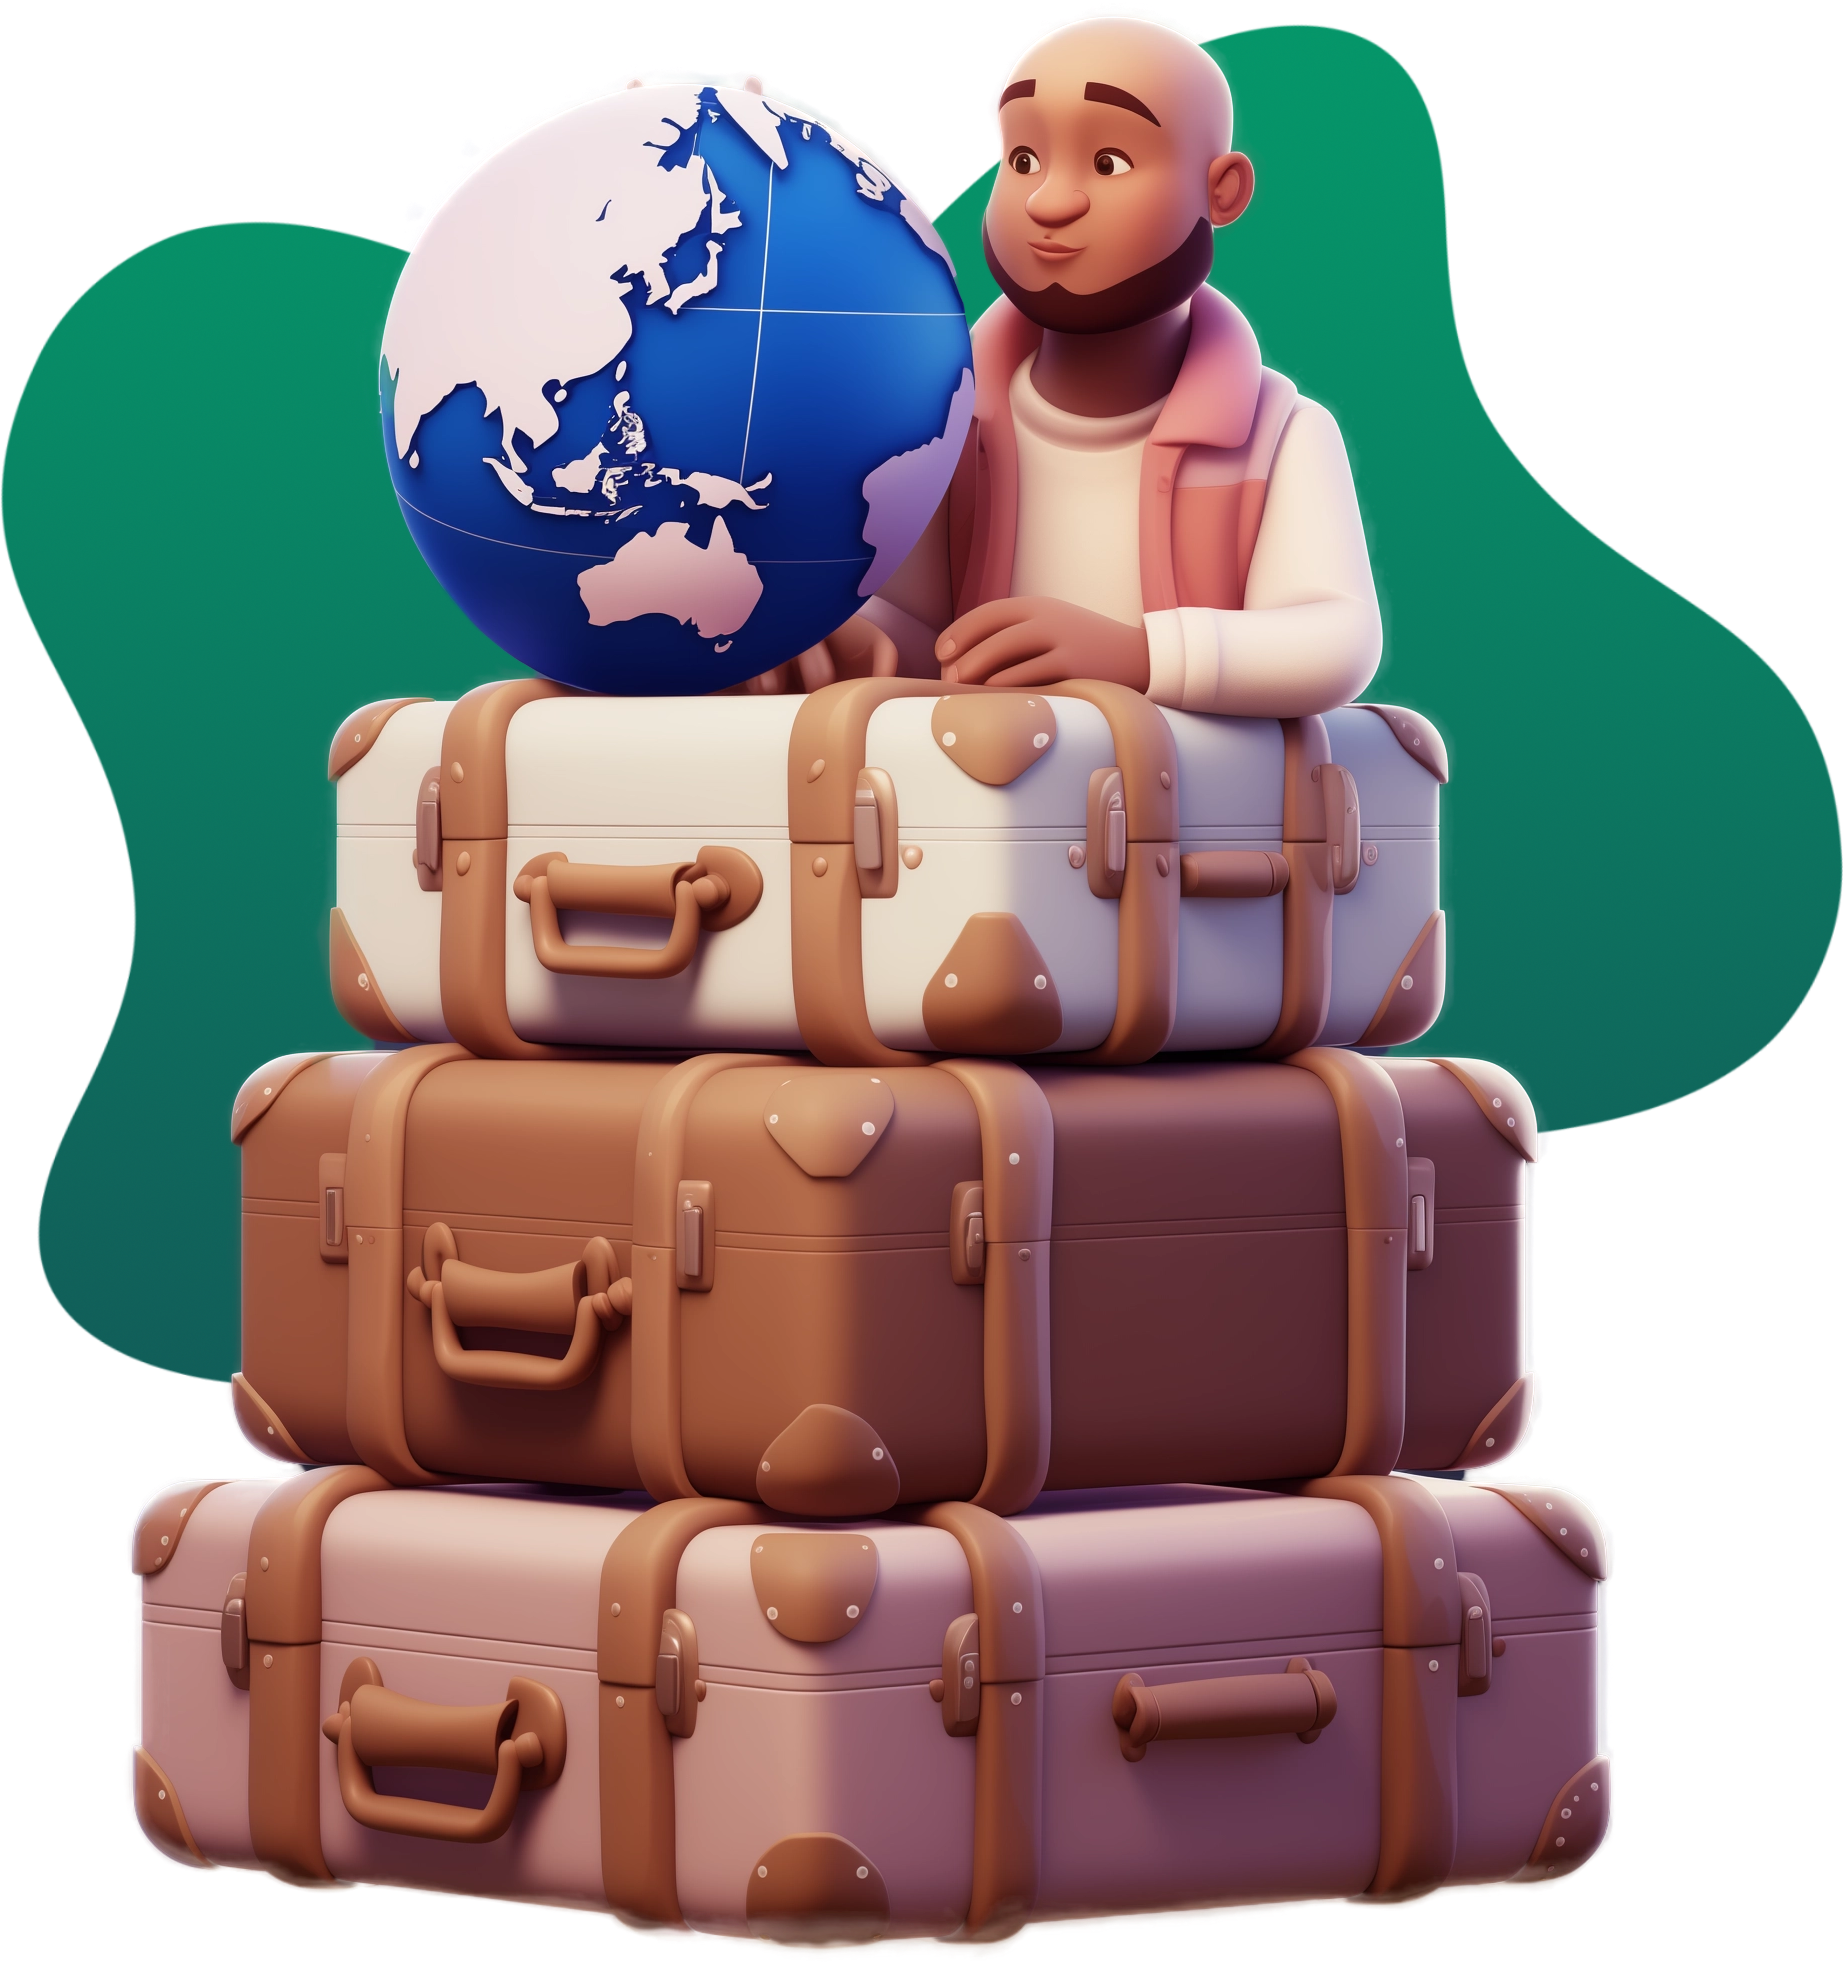 A bearded man leaning on a pile of suitcases and spinning a globe.